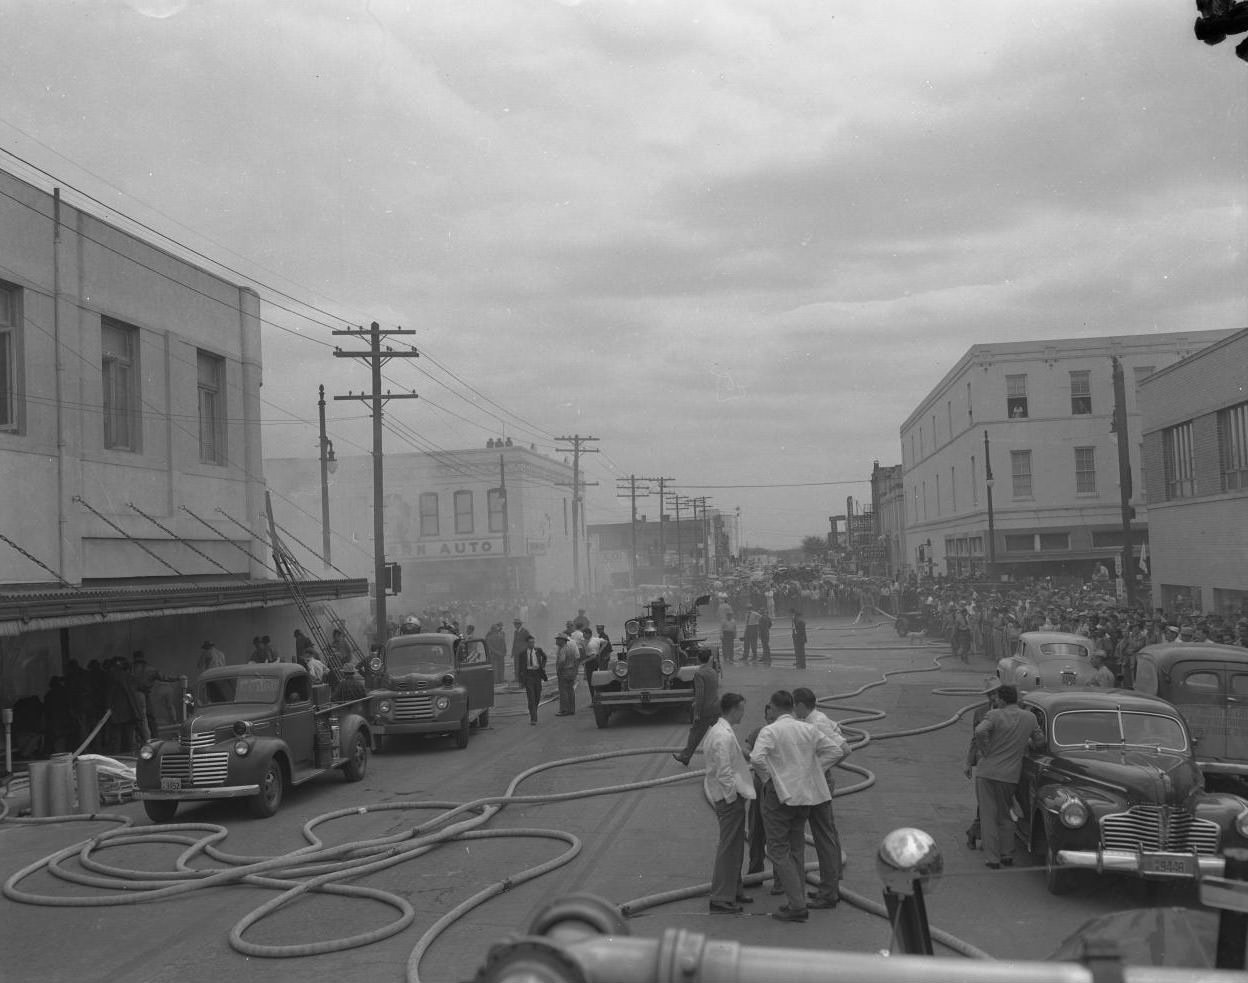 Fire Trucks in Front of Smoking T.H. Williams & Co. Building, 1950.